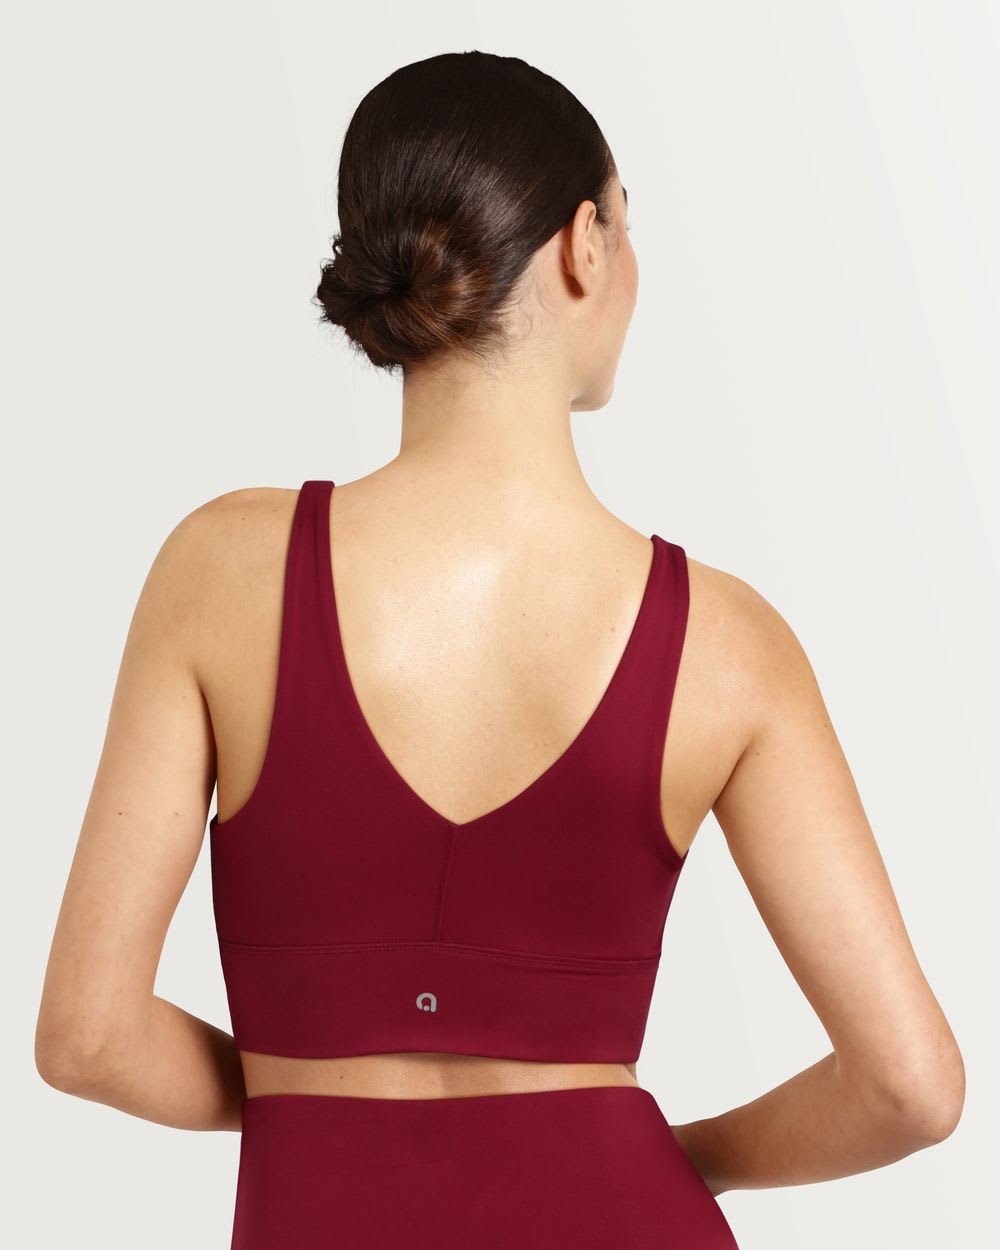 Recycled Polyester Scoop Neck Sports Bra Pulse Hyba